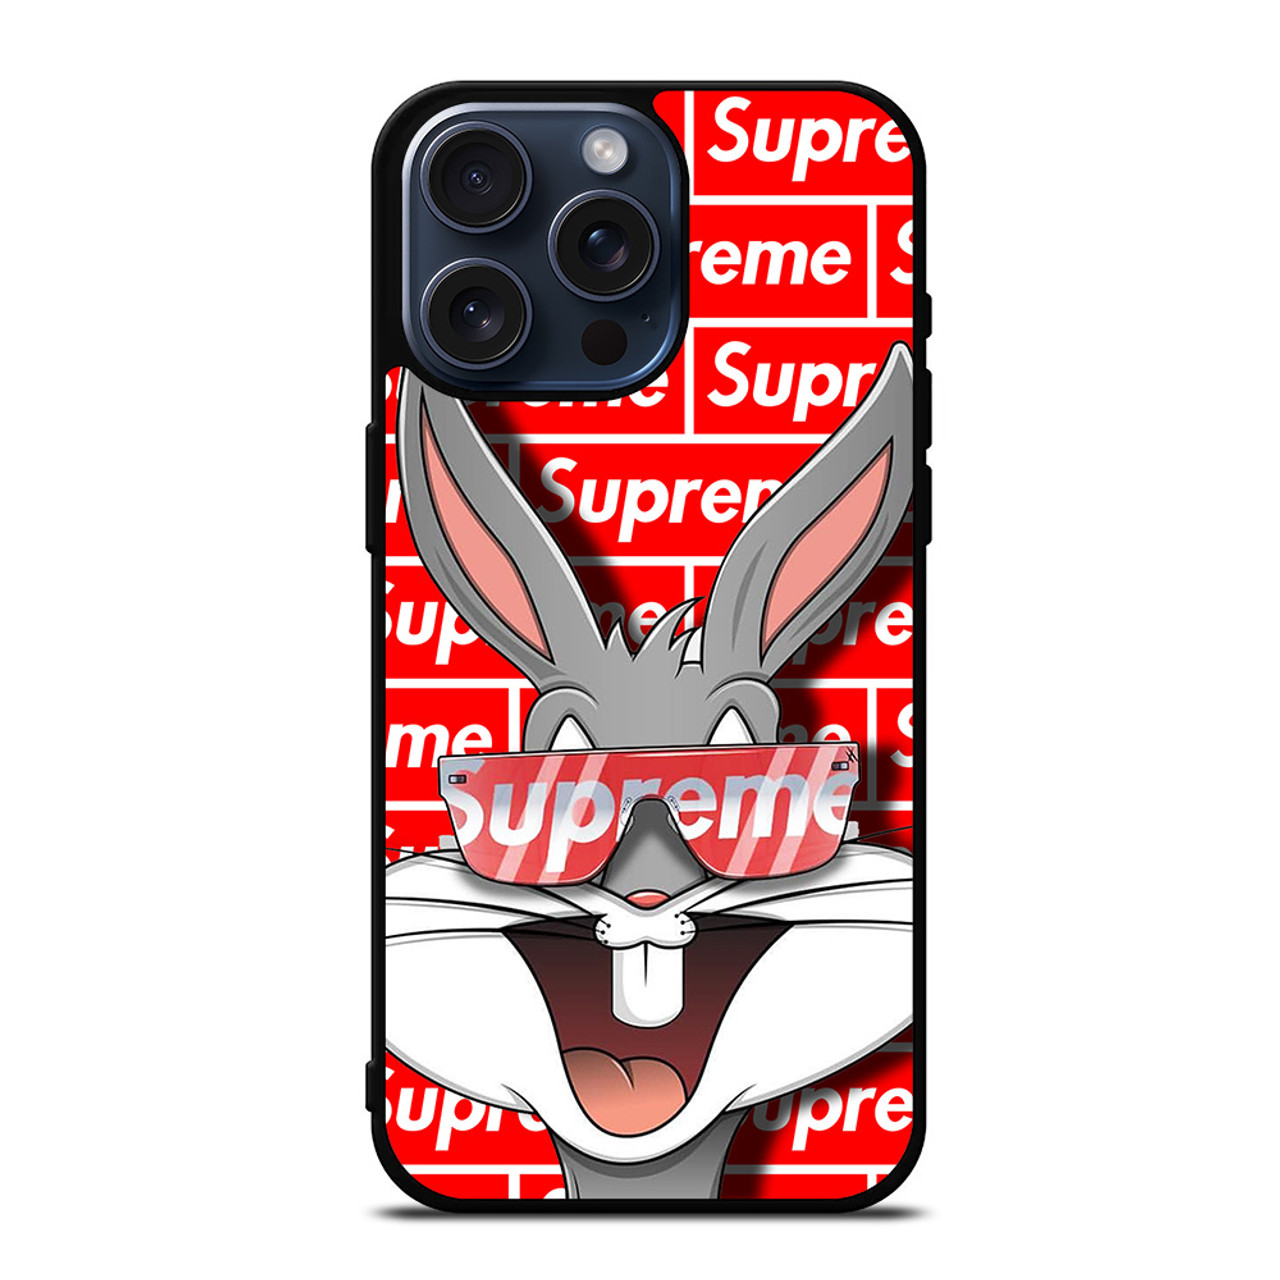 Supreme iPhone Cases & Covers